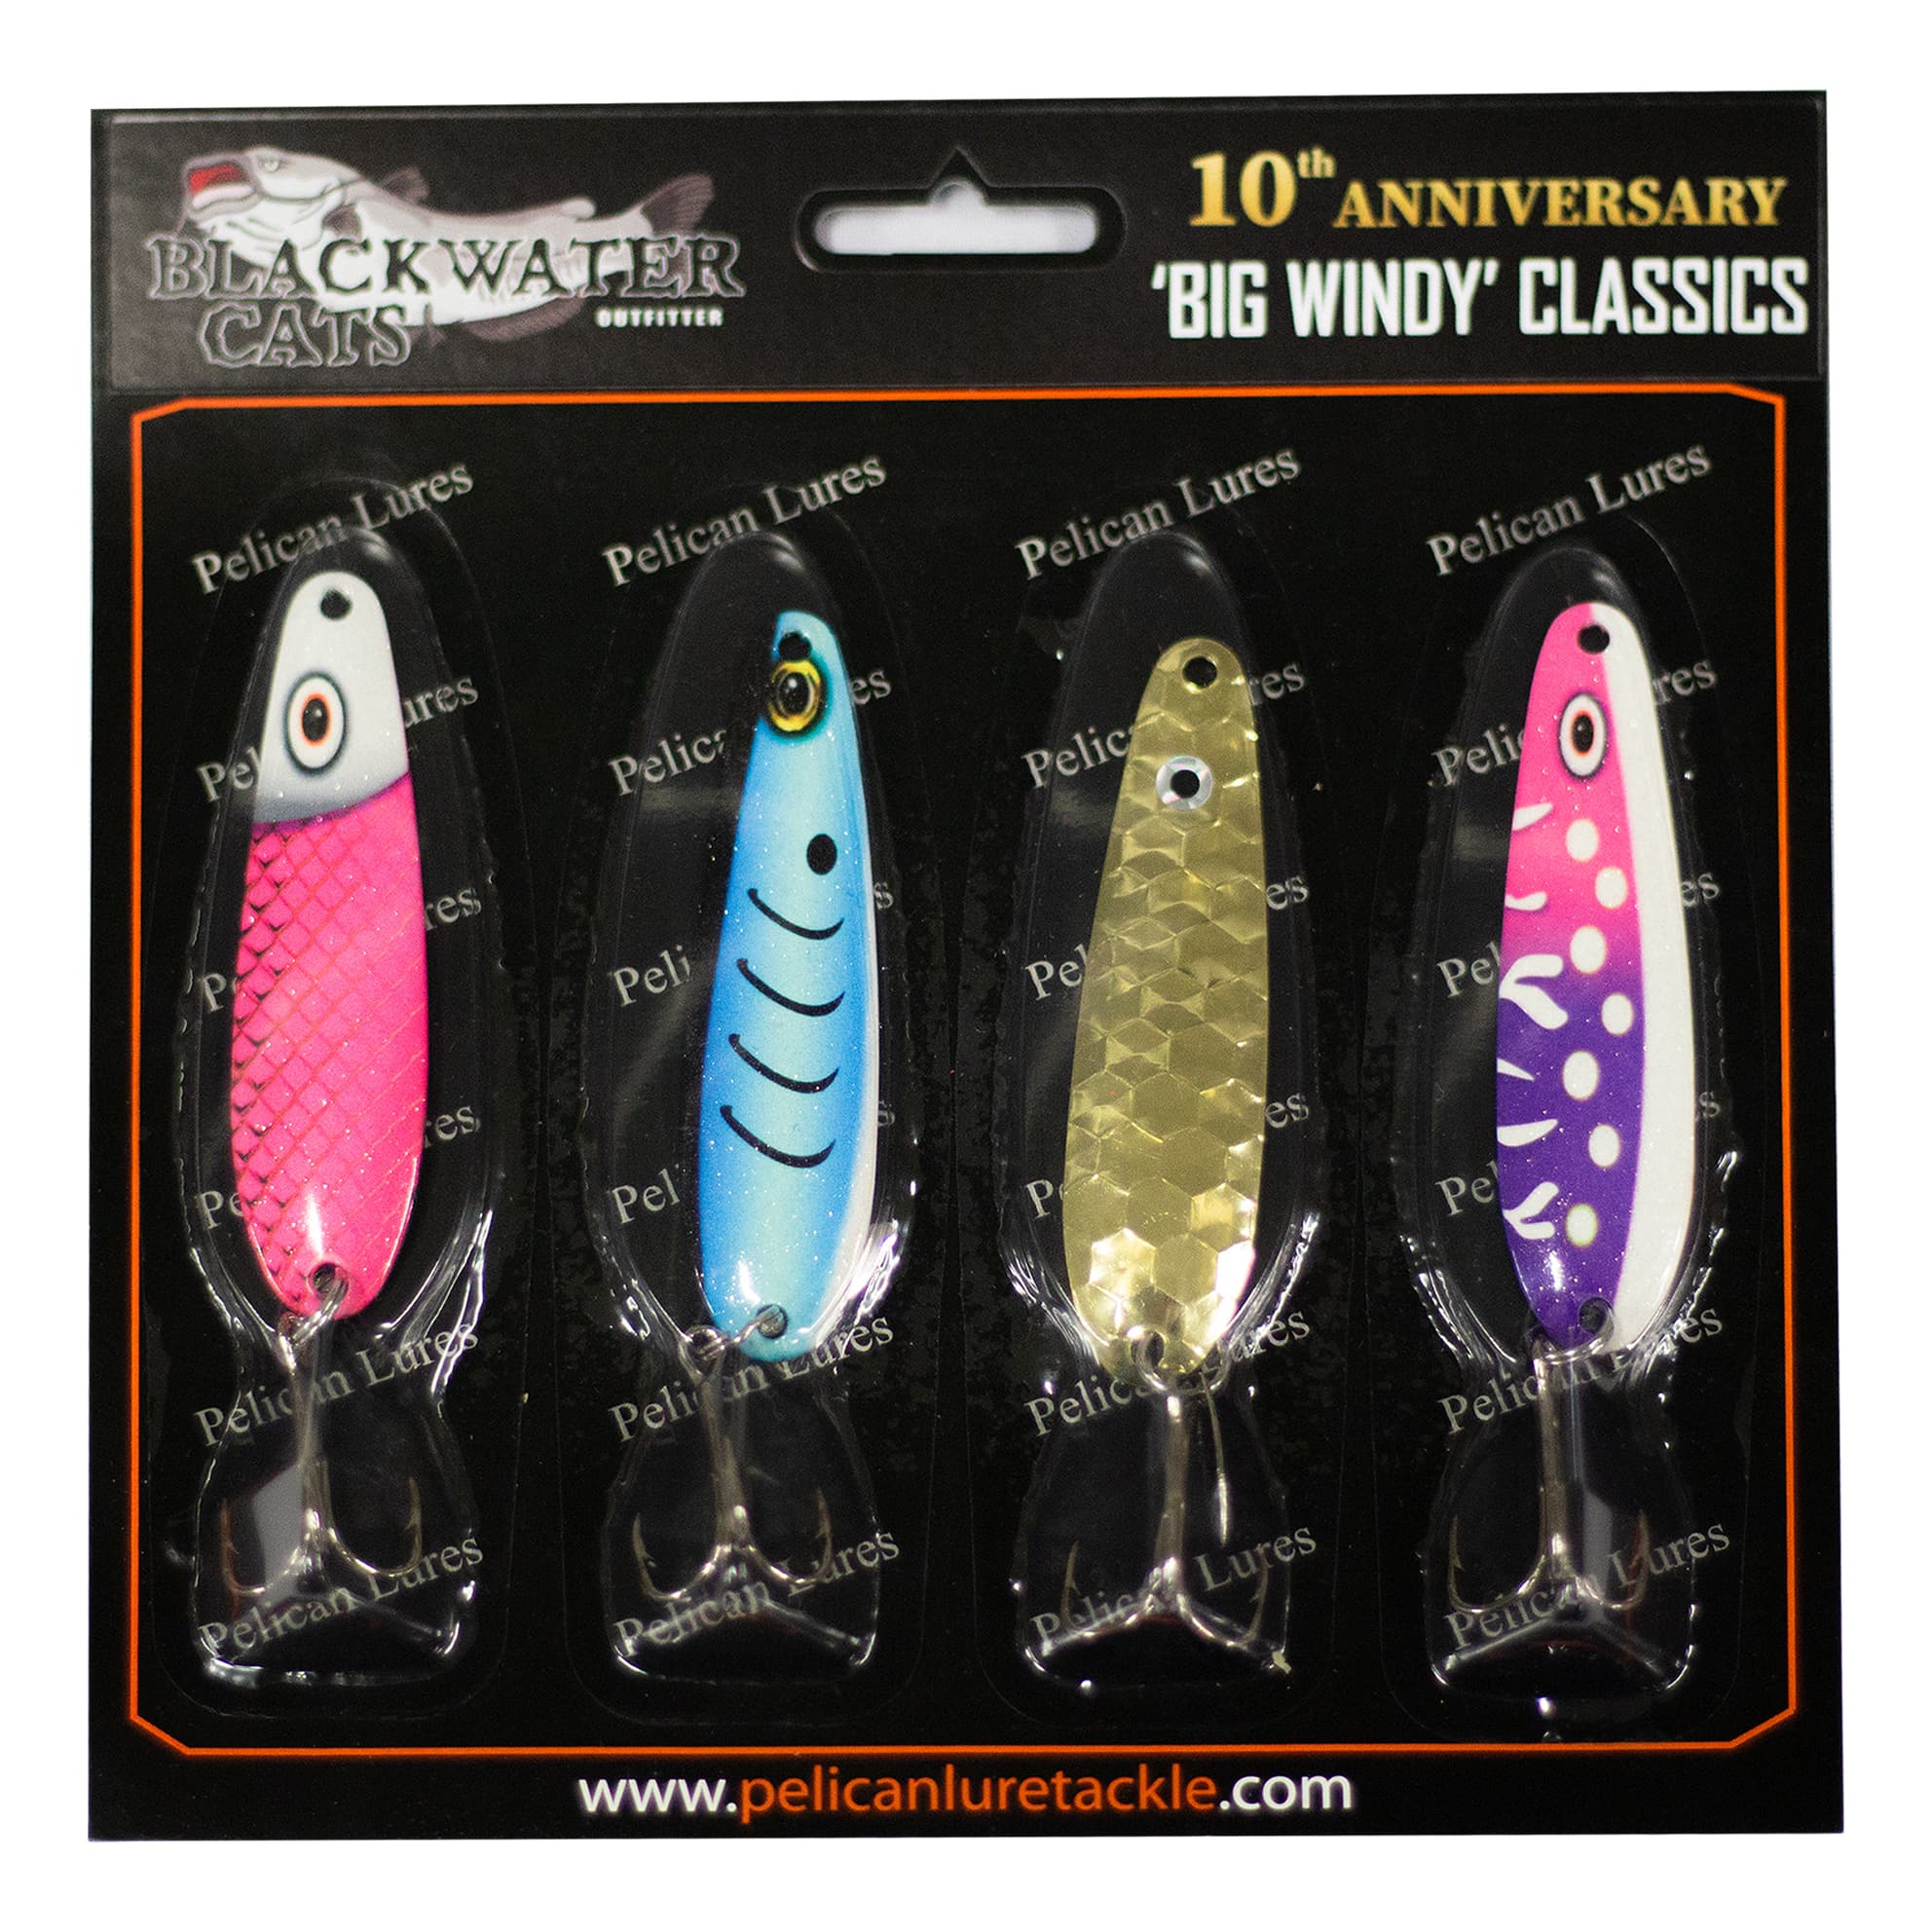 Pelican Lures® Flutter Spoon Combo Pack - Blackwater Catfish 10th Anniversary